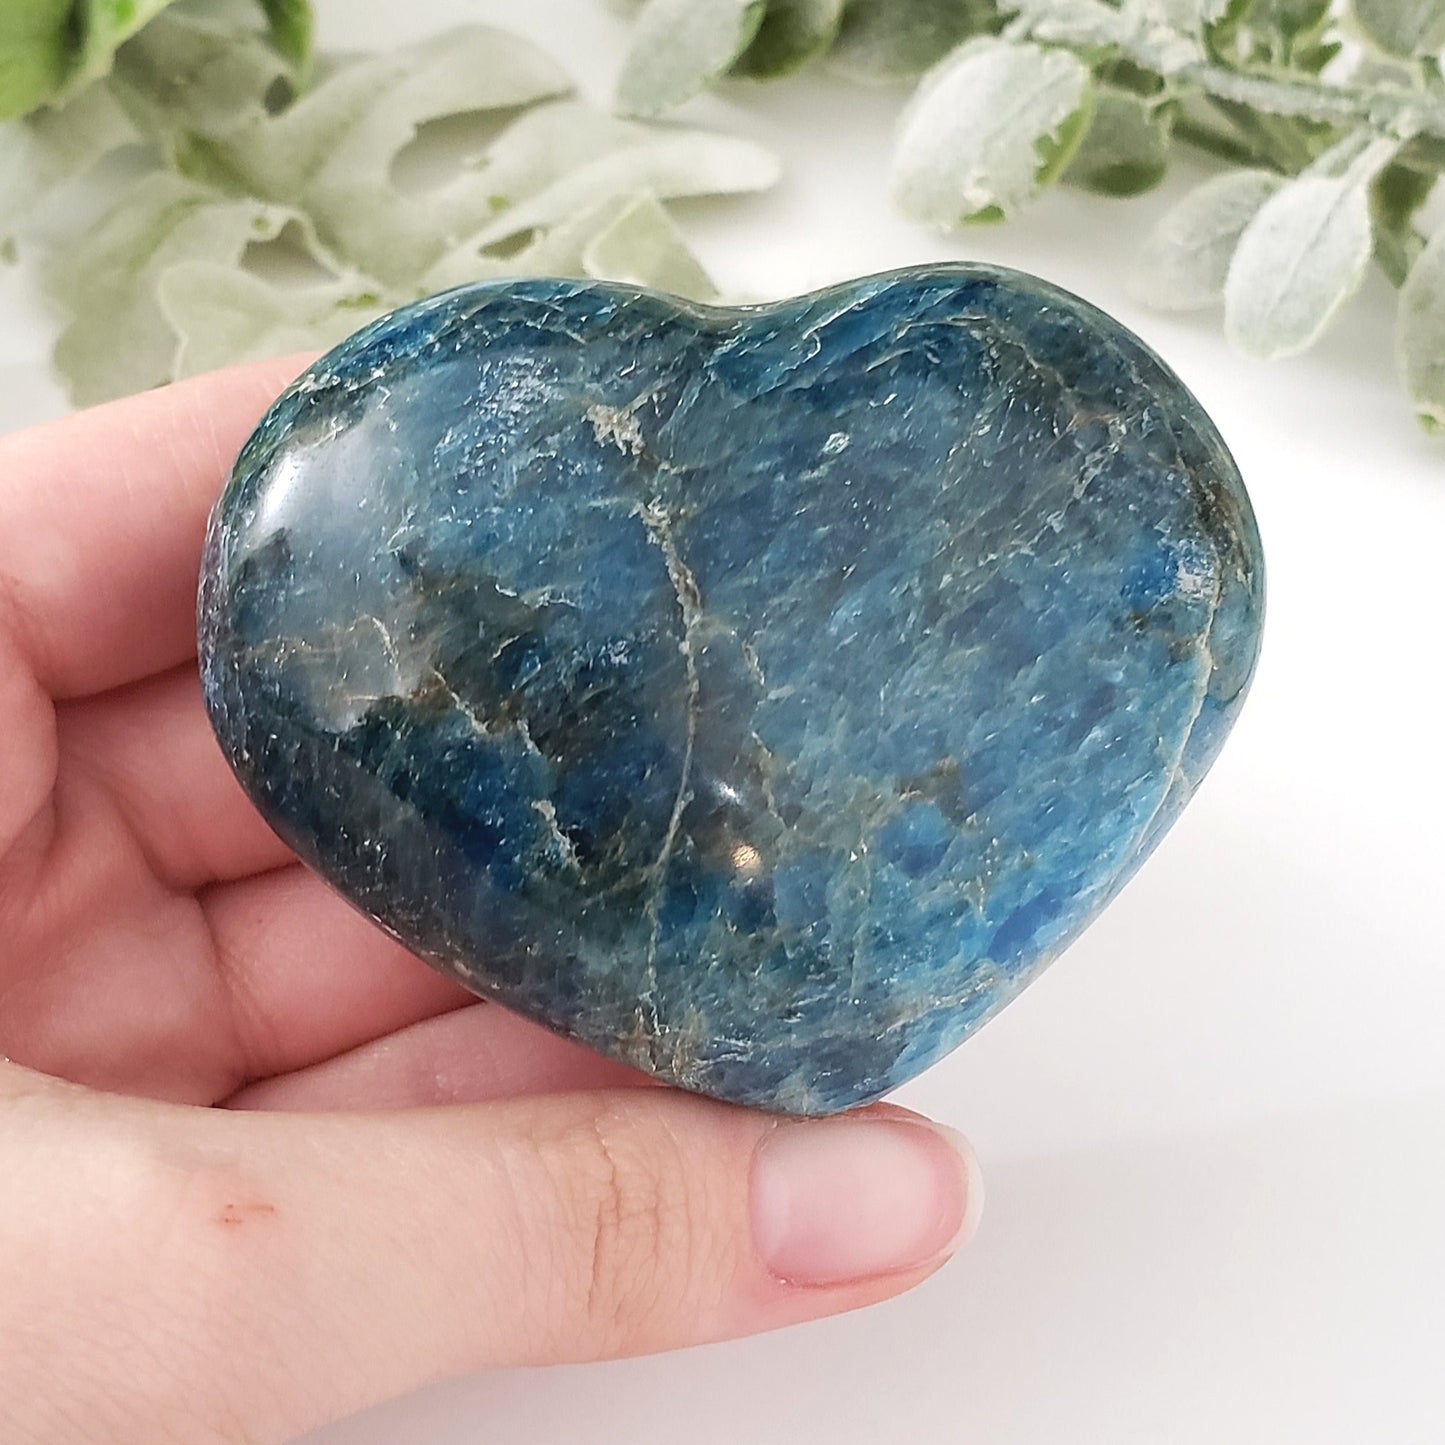 Authentic Blue Apatite Heart-Shaped Crystal - Natural Beauty